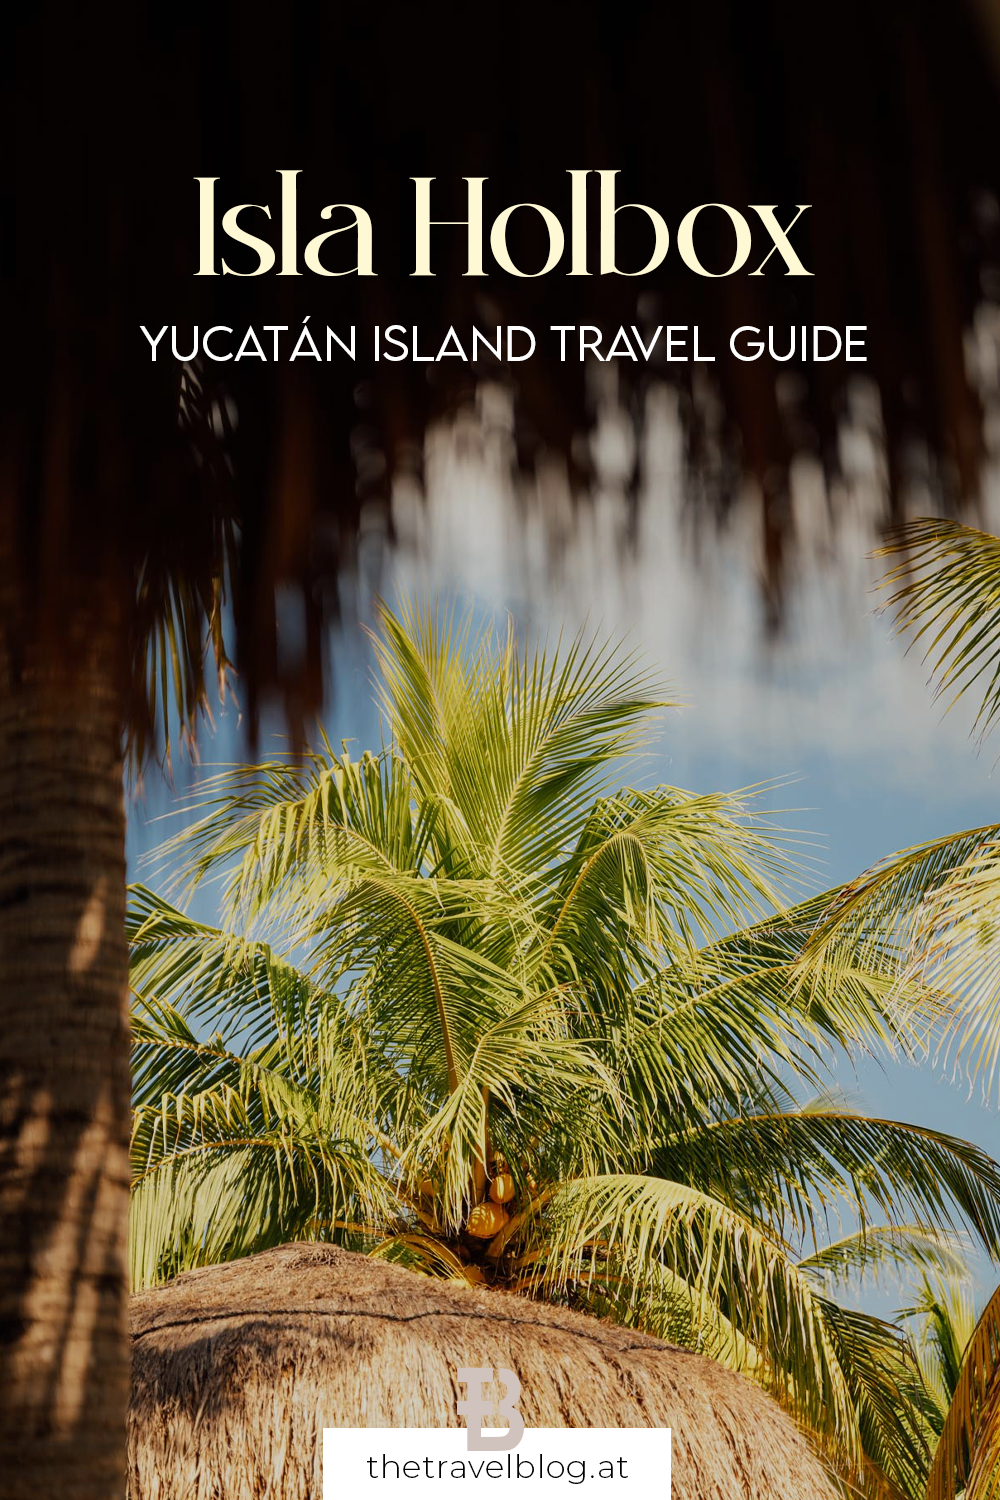 Up to date travel guide for a 2023 visit of Isla Holbox in Yucatán Mexico